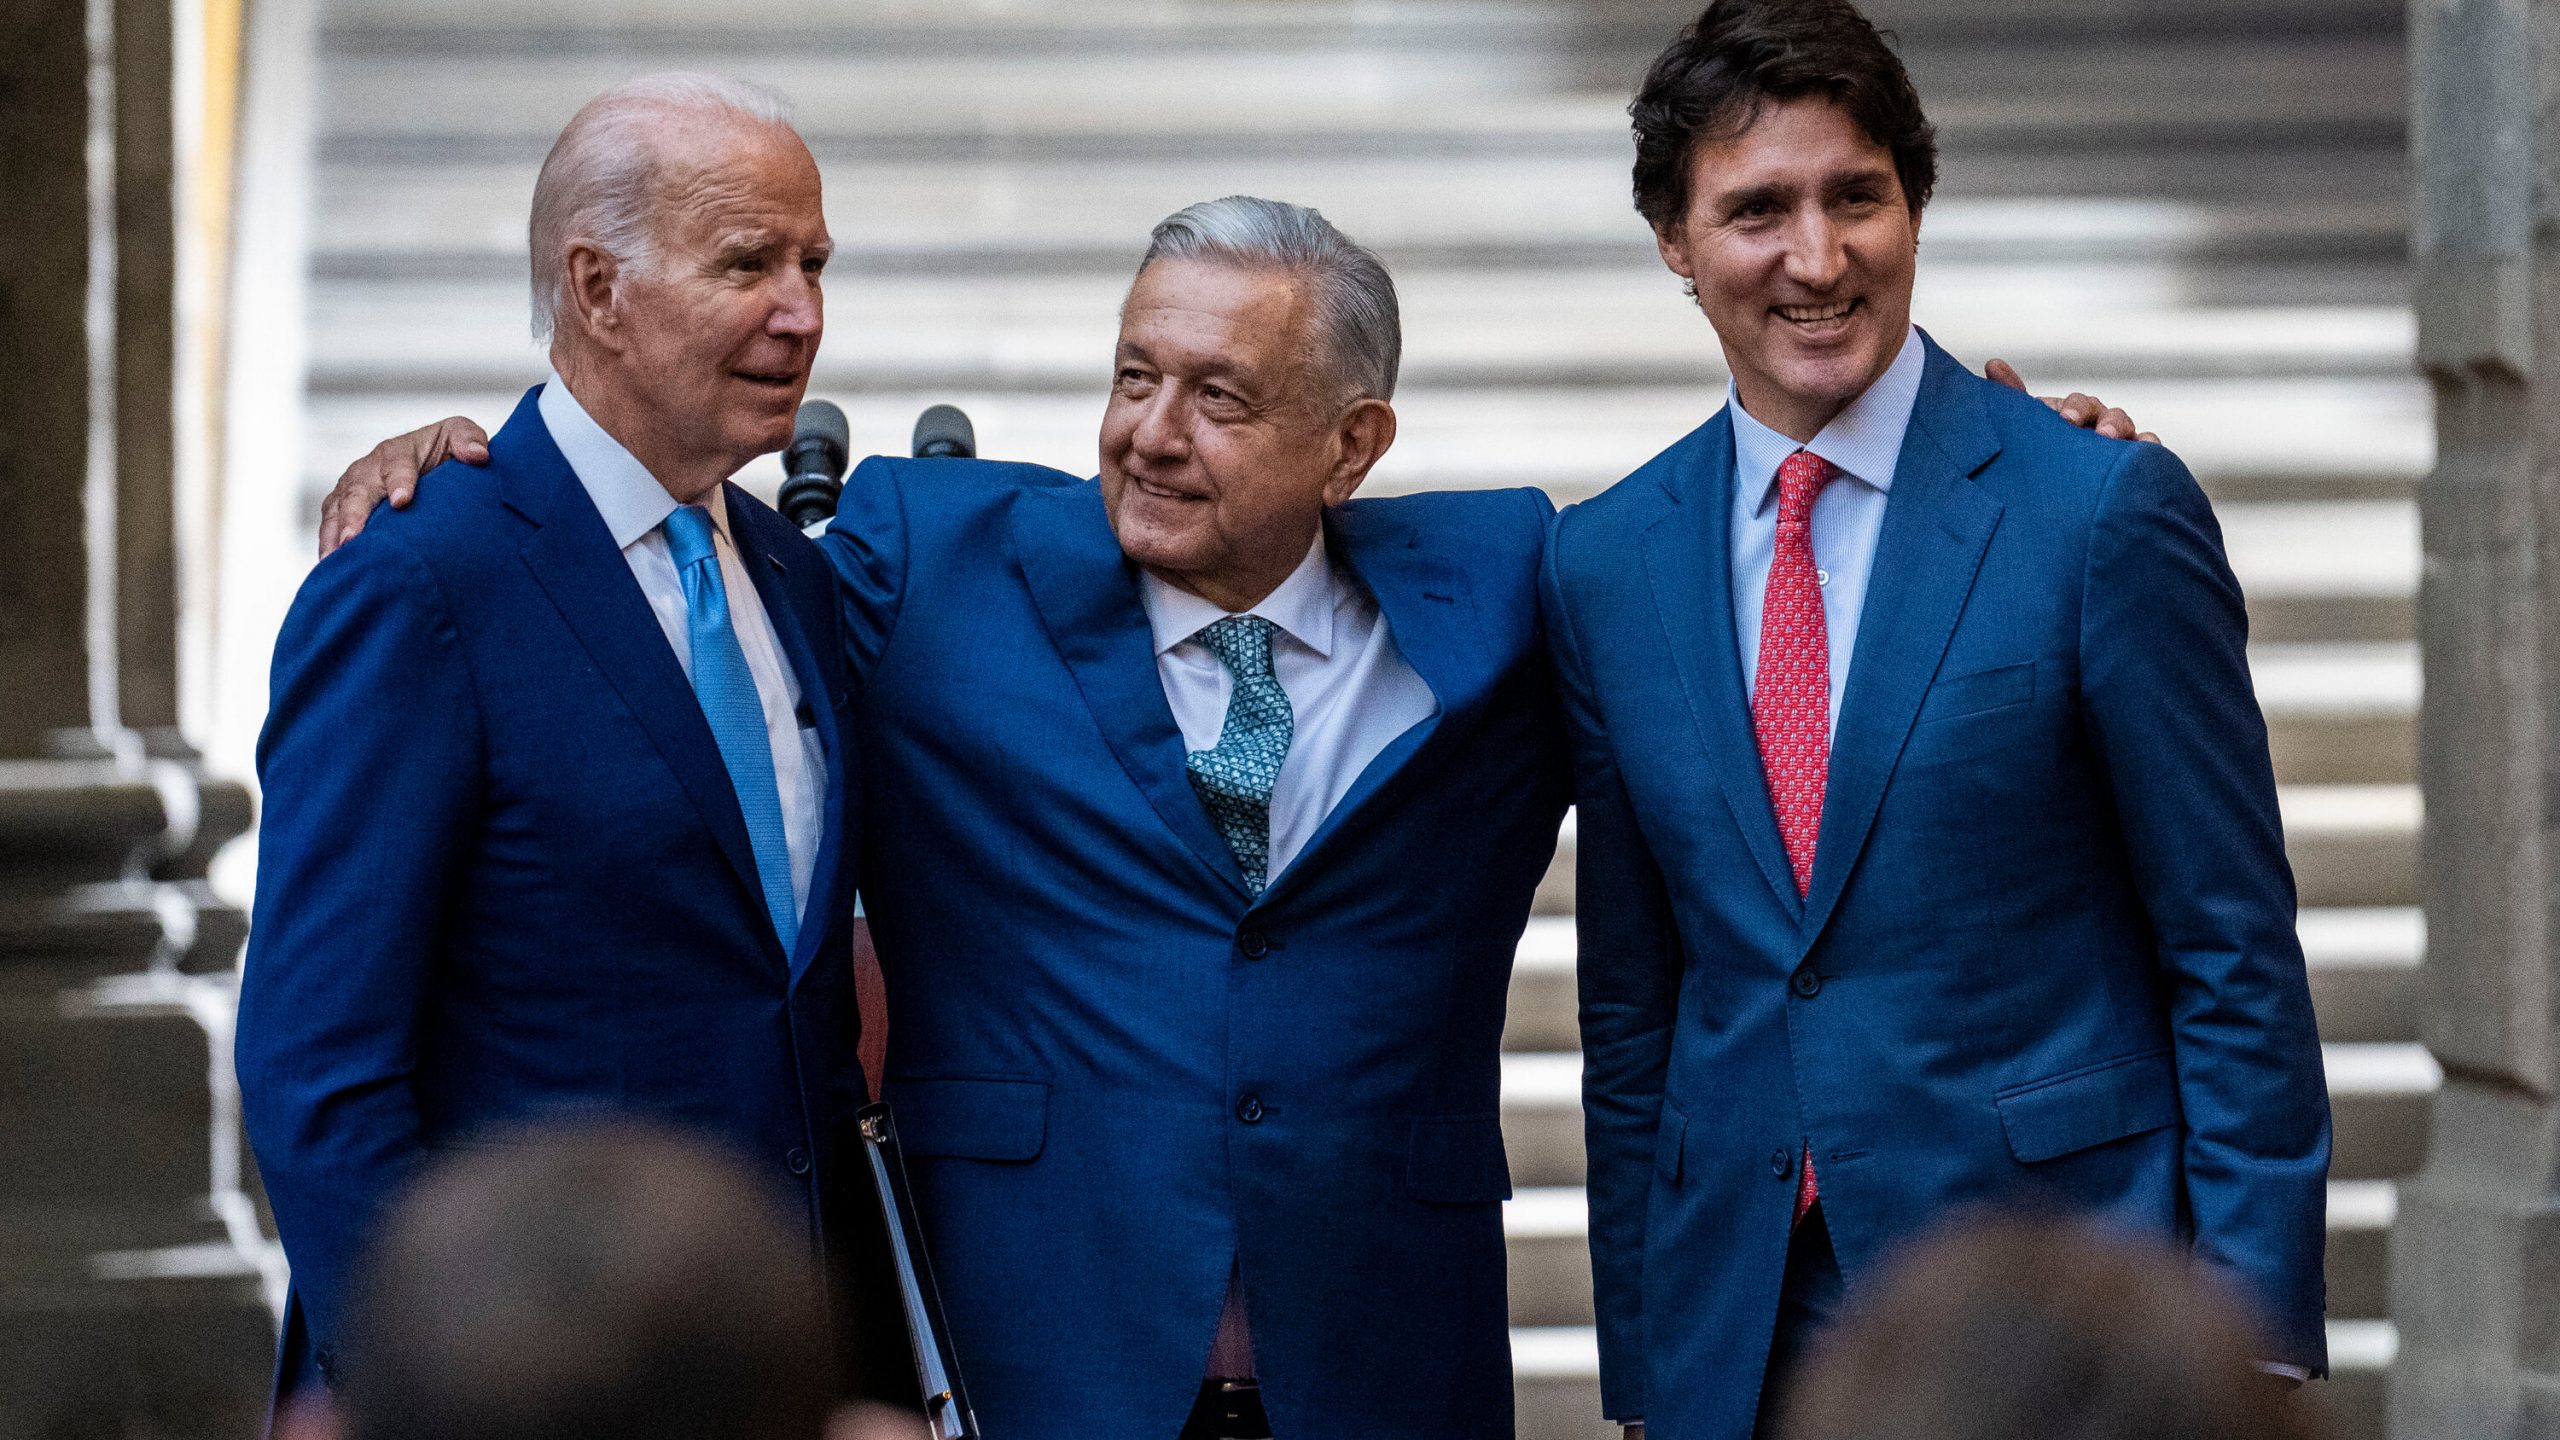 On day two of Mexico Summit, Mexican president thanks Biden